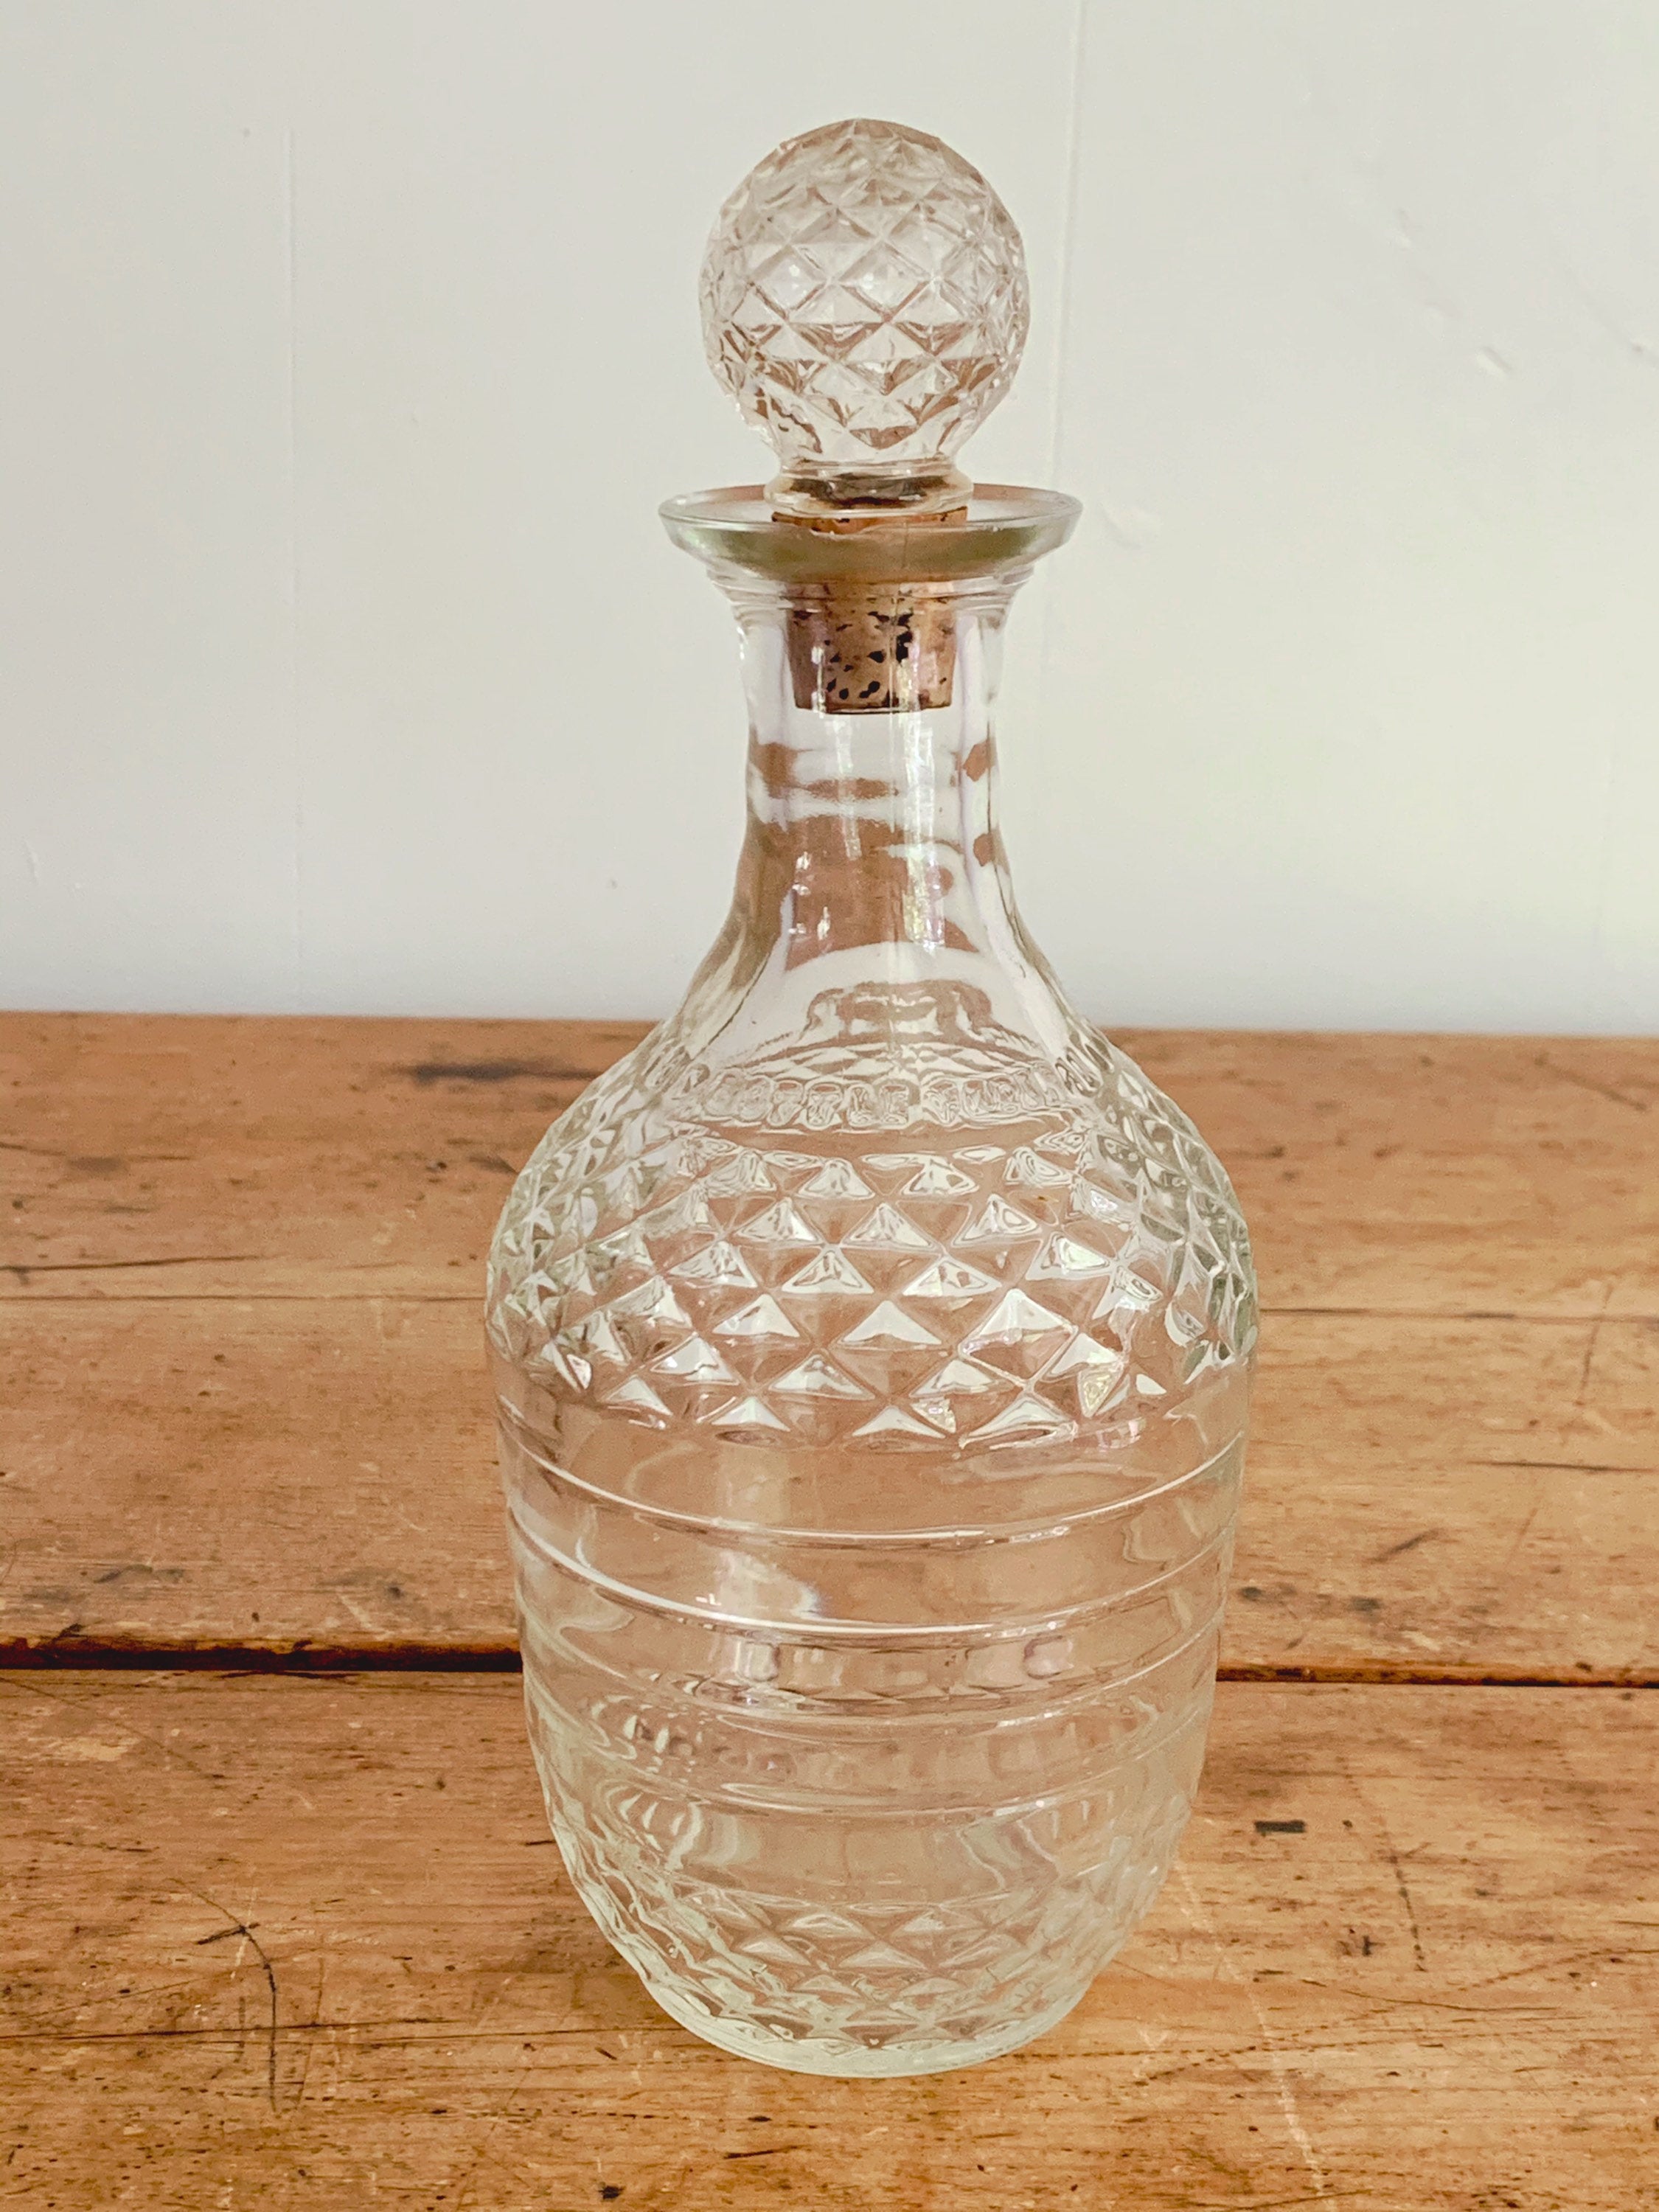 Vintage Pressed Glass Liquor Bottle Decanters with Facetted Round Stopper | Whiskey Decanter Barware Home Bar Decor | Gift for Him